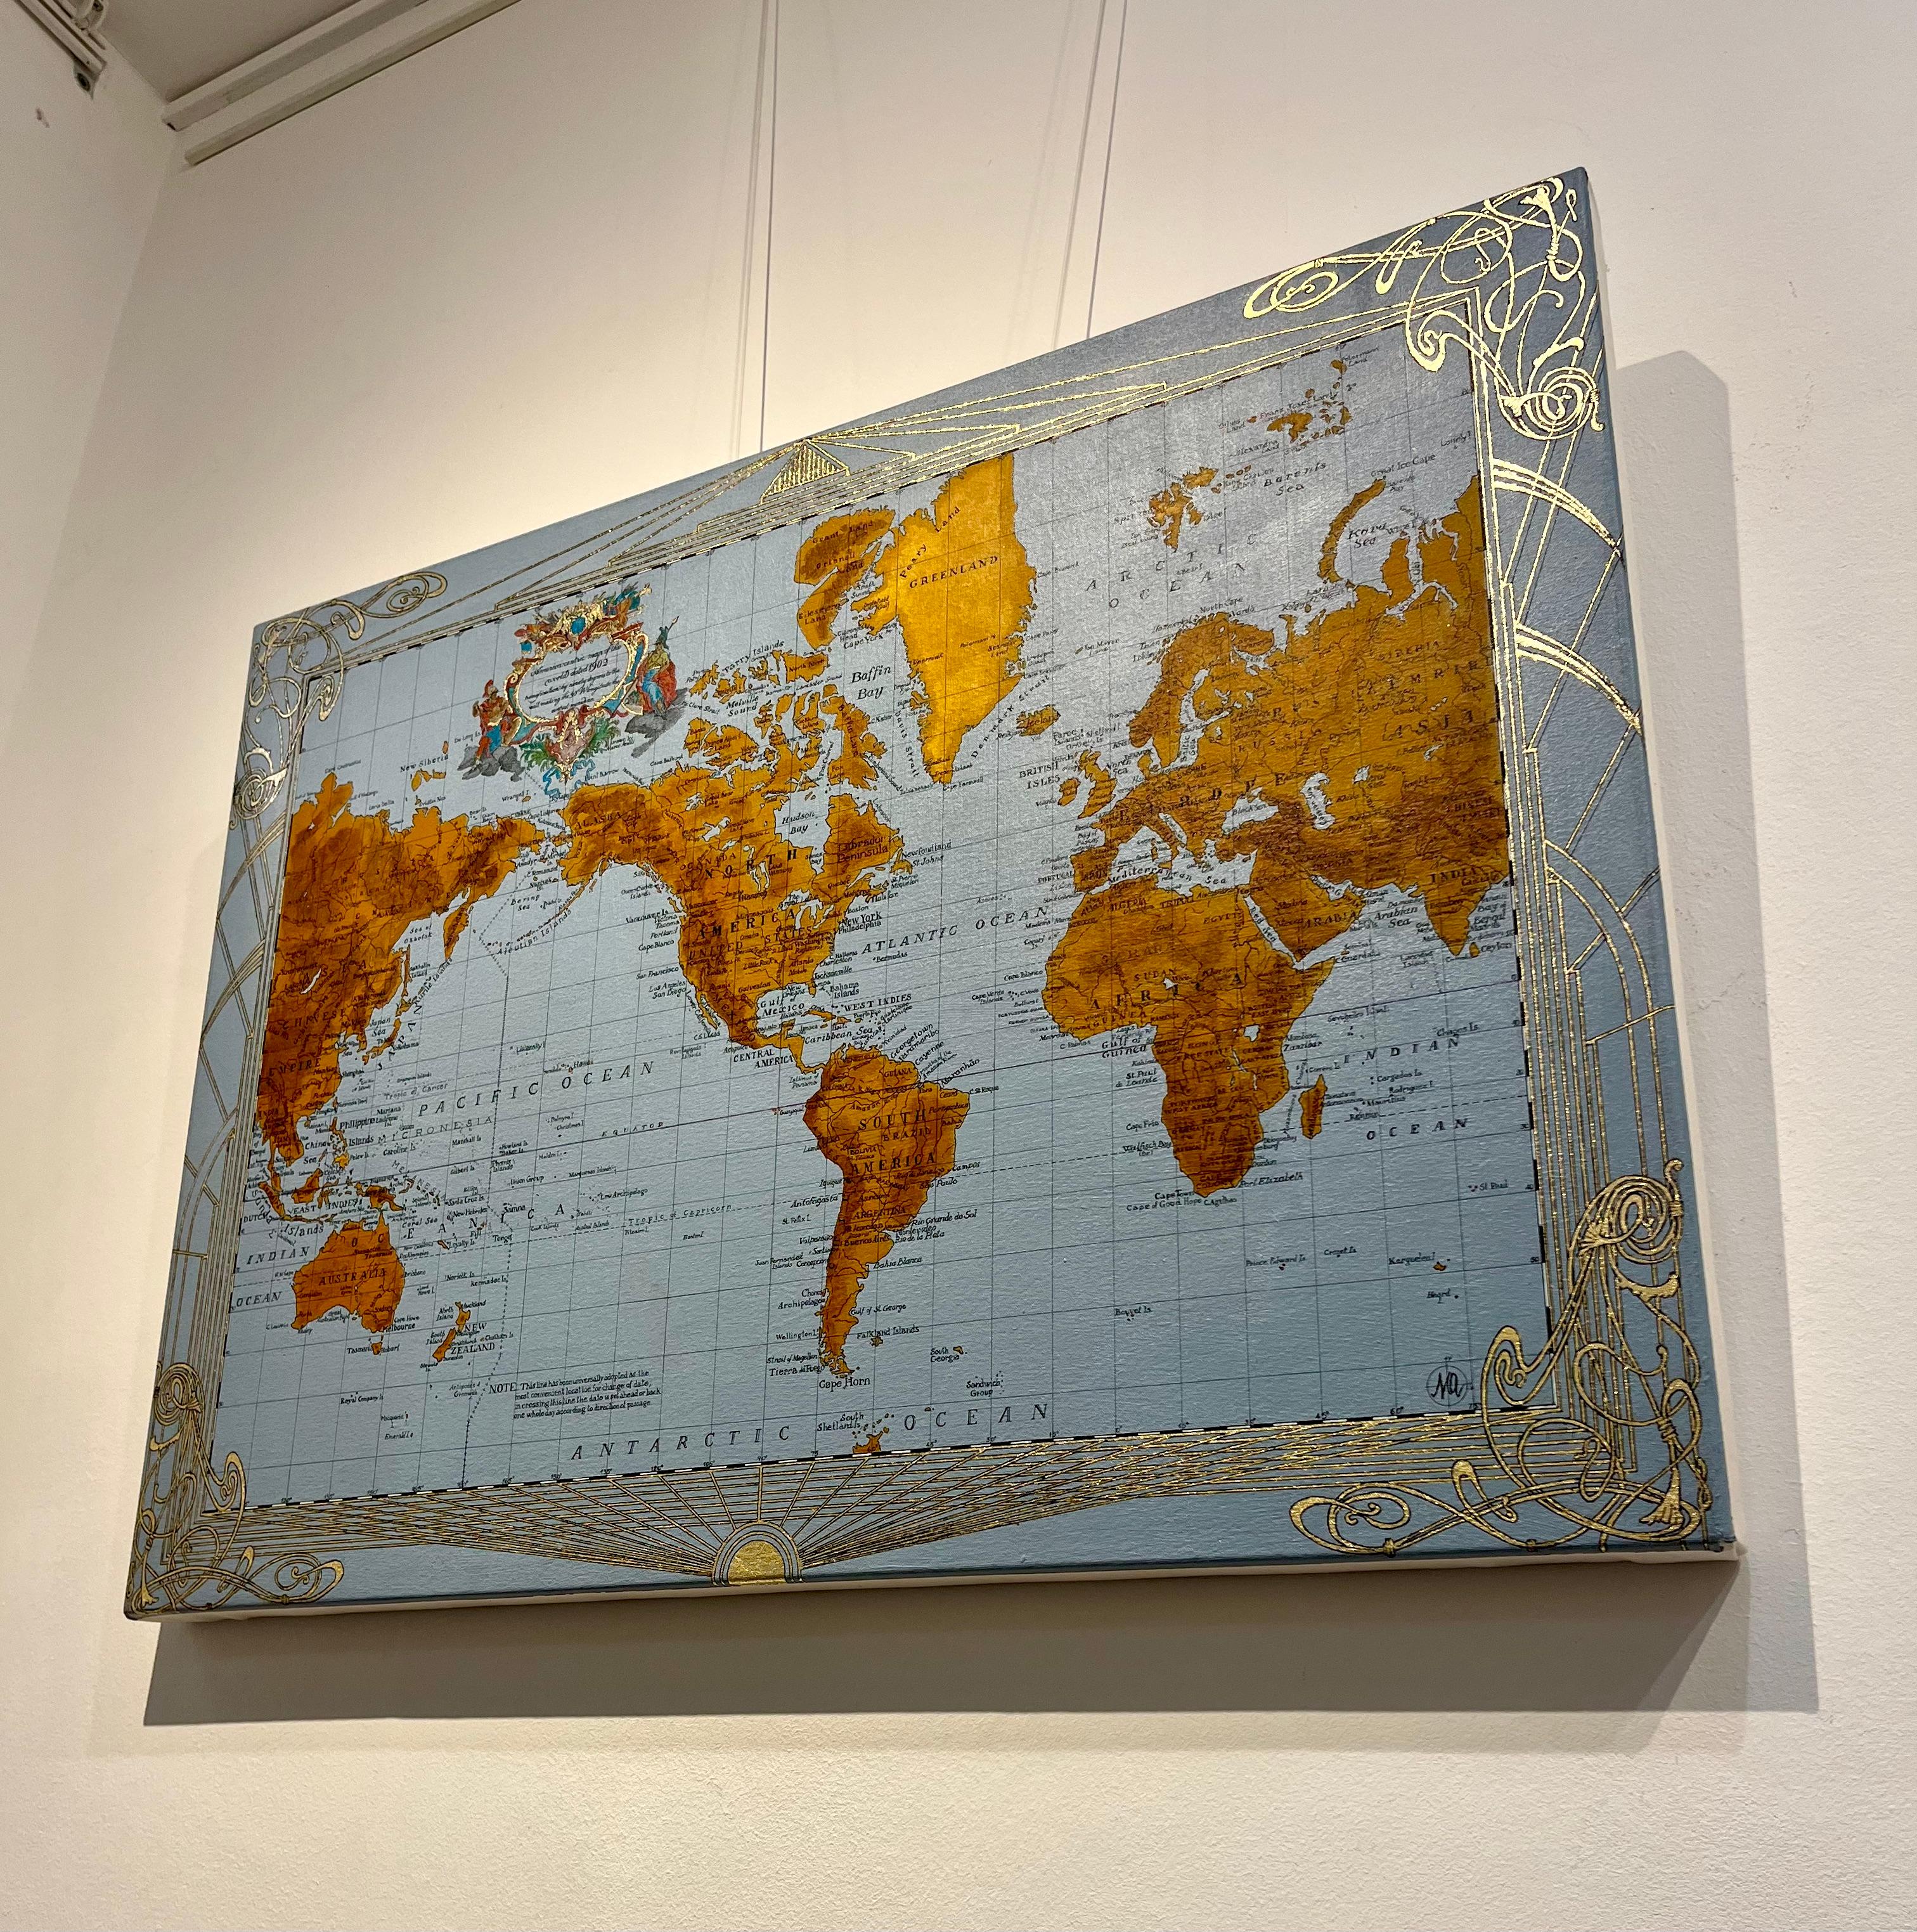 1902 Americacentric Map of the World - Painting, Mixed Media, Gilding, Ink, Map - Contemporary Mixed Media Art by Marco Araldi